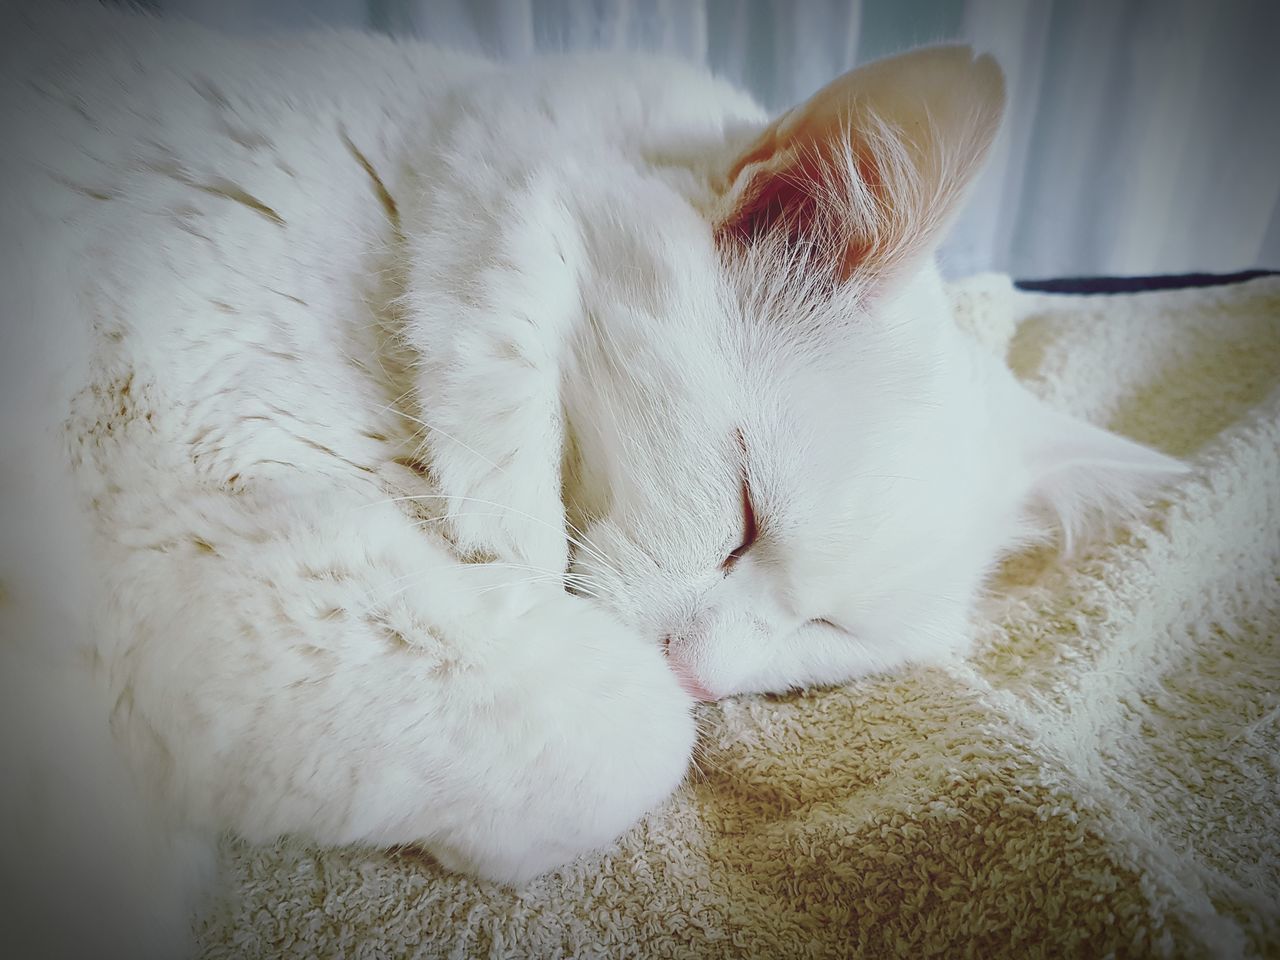 domestic cat, pets, animal themes, domestic animals, mammal, one animal, sleeping, feline, eyes closed, indoors, white color, lying down, relaxation, home interior, no people, close-up, bed, day, nature